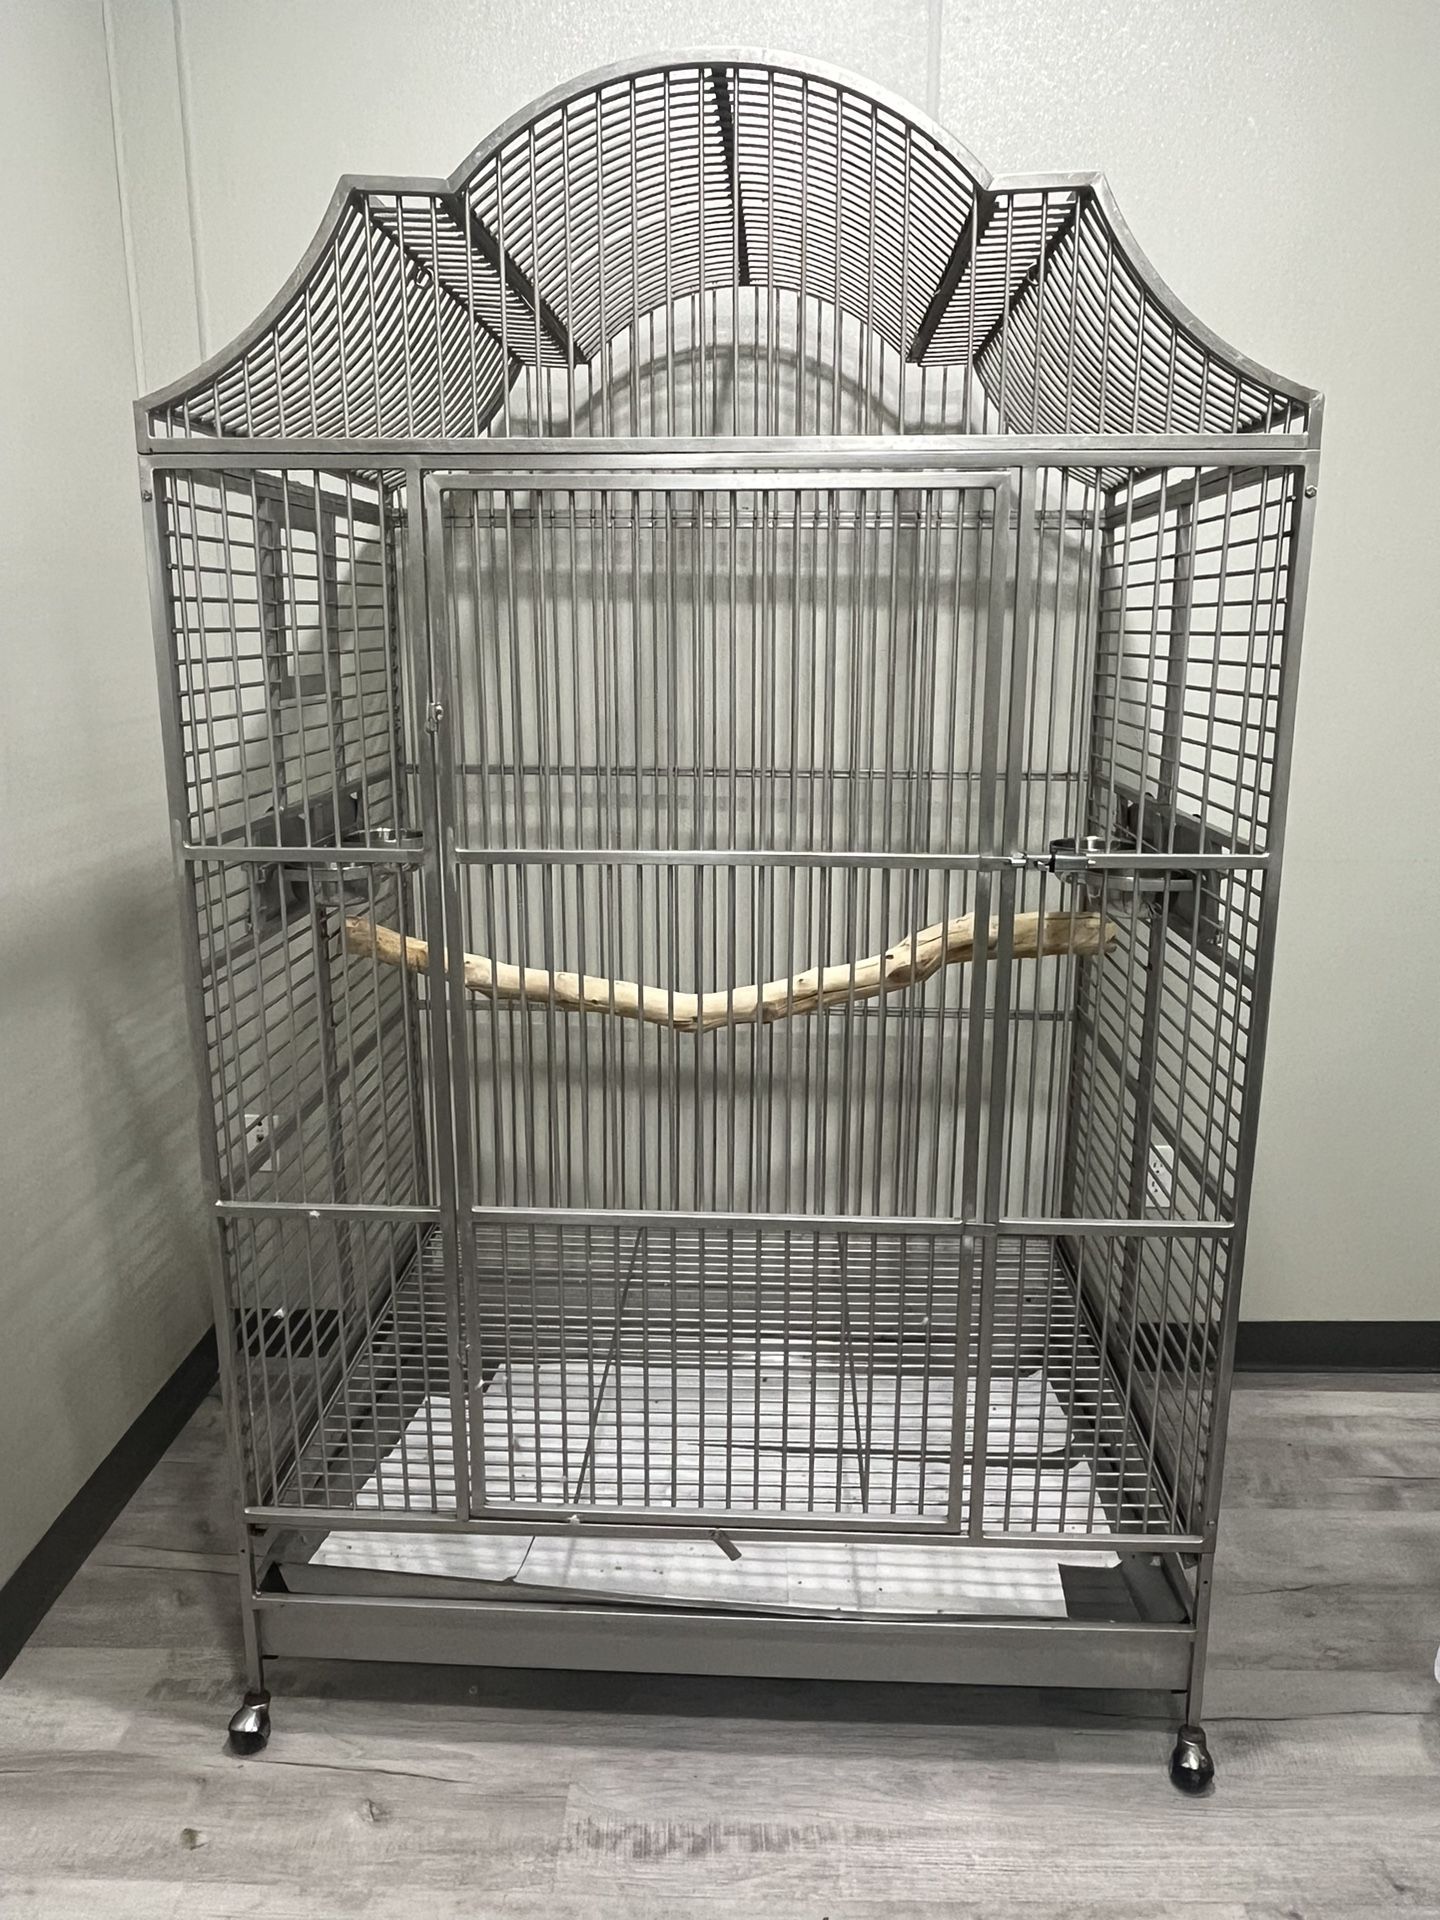 Stainless Steel Kings Cages For Large Bird 